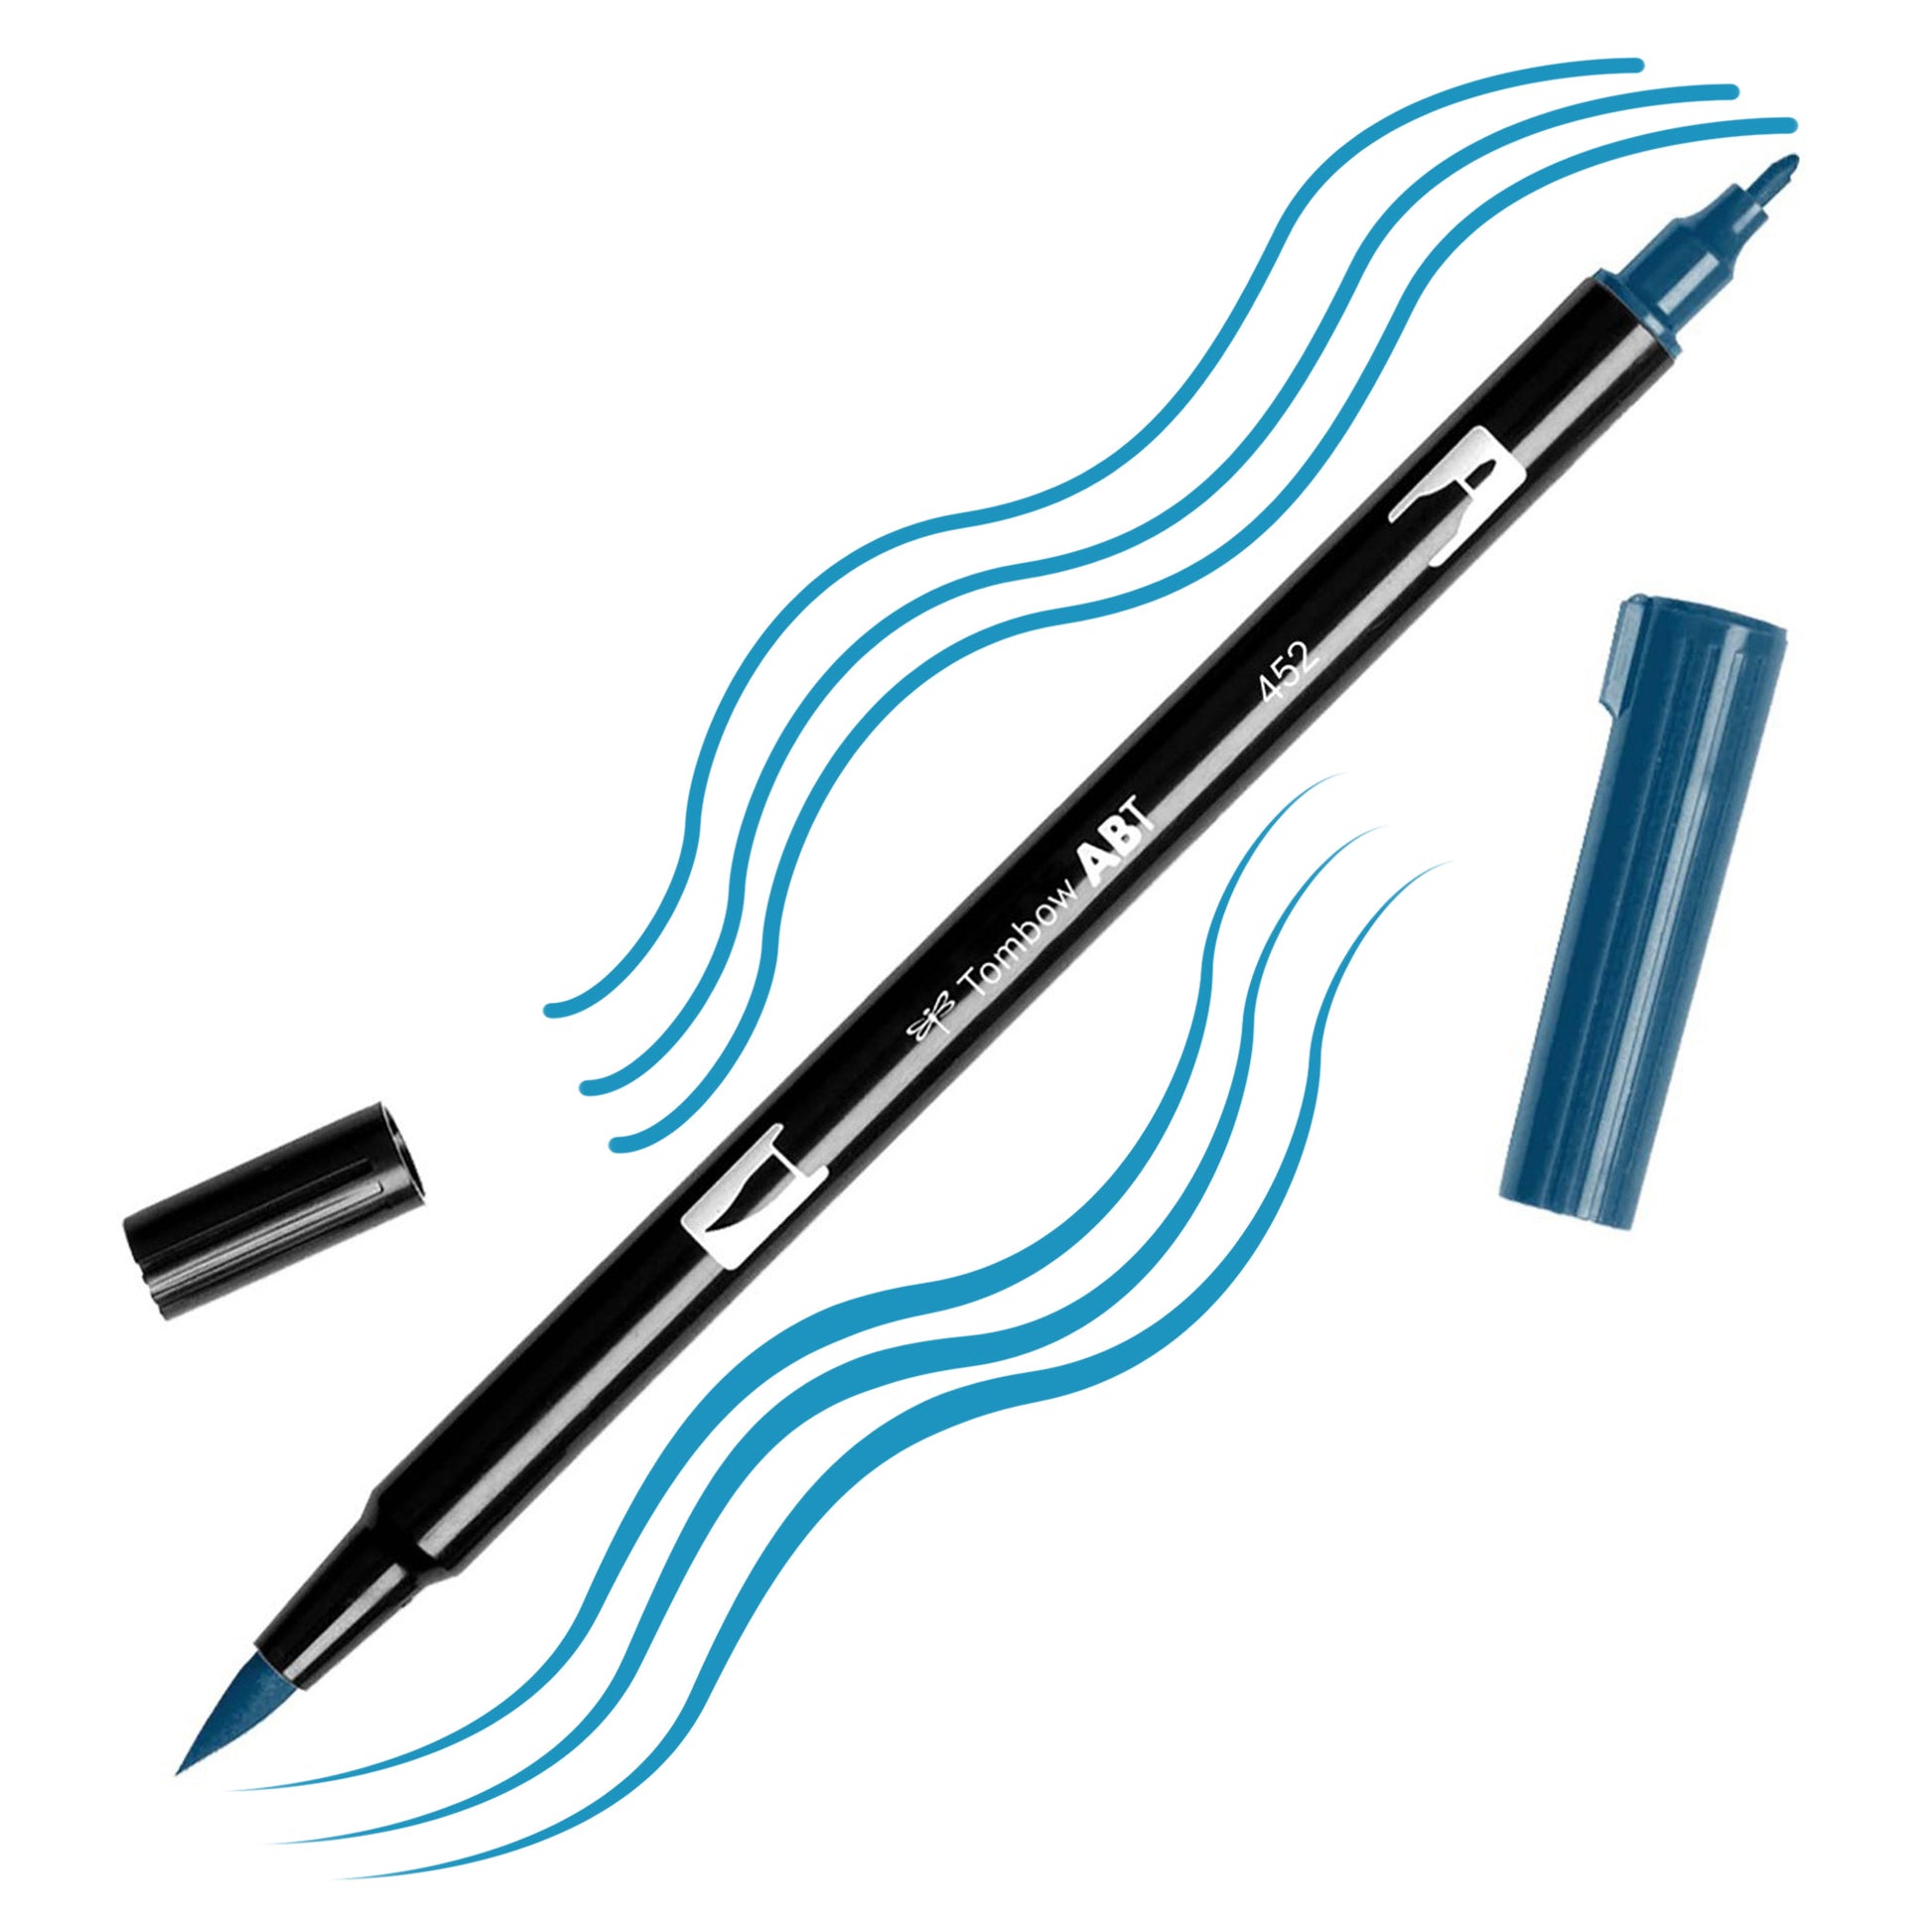 Process Blue Tombow double-headed brush-pen with a flexible nylon fiber brush tip and a fine tip against a white background with Process Blue strokes